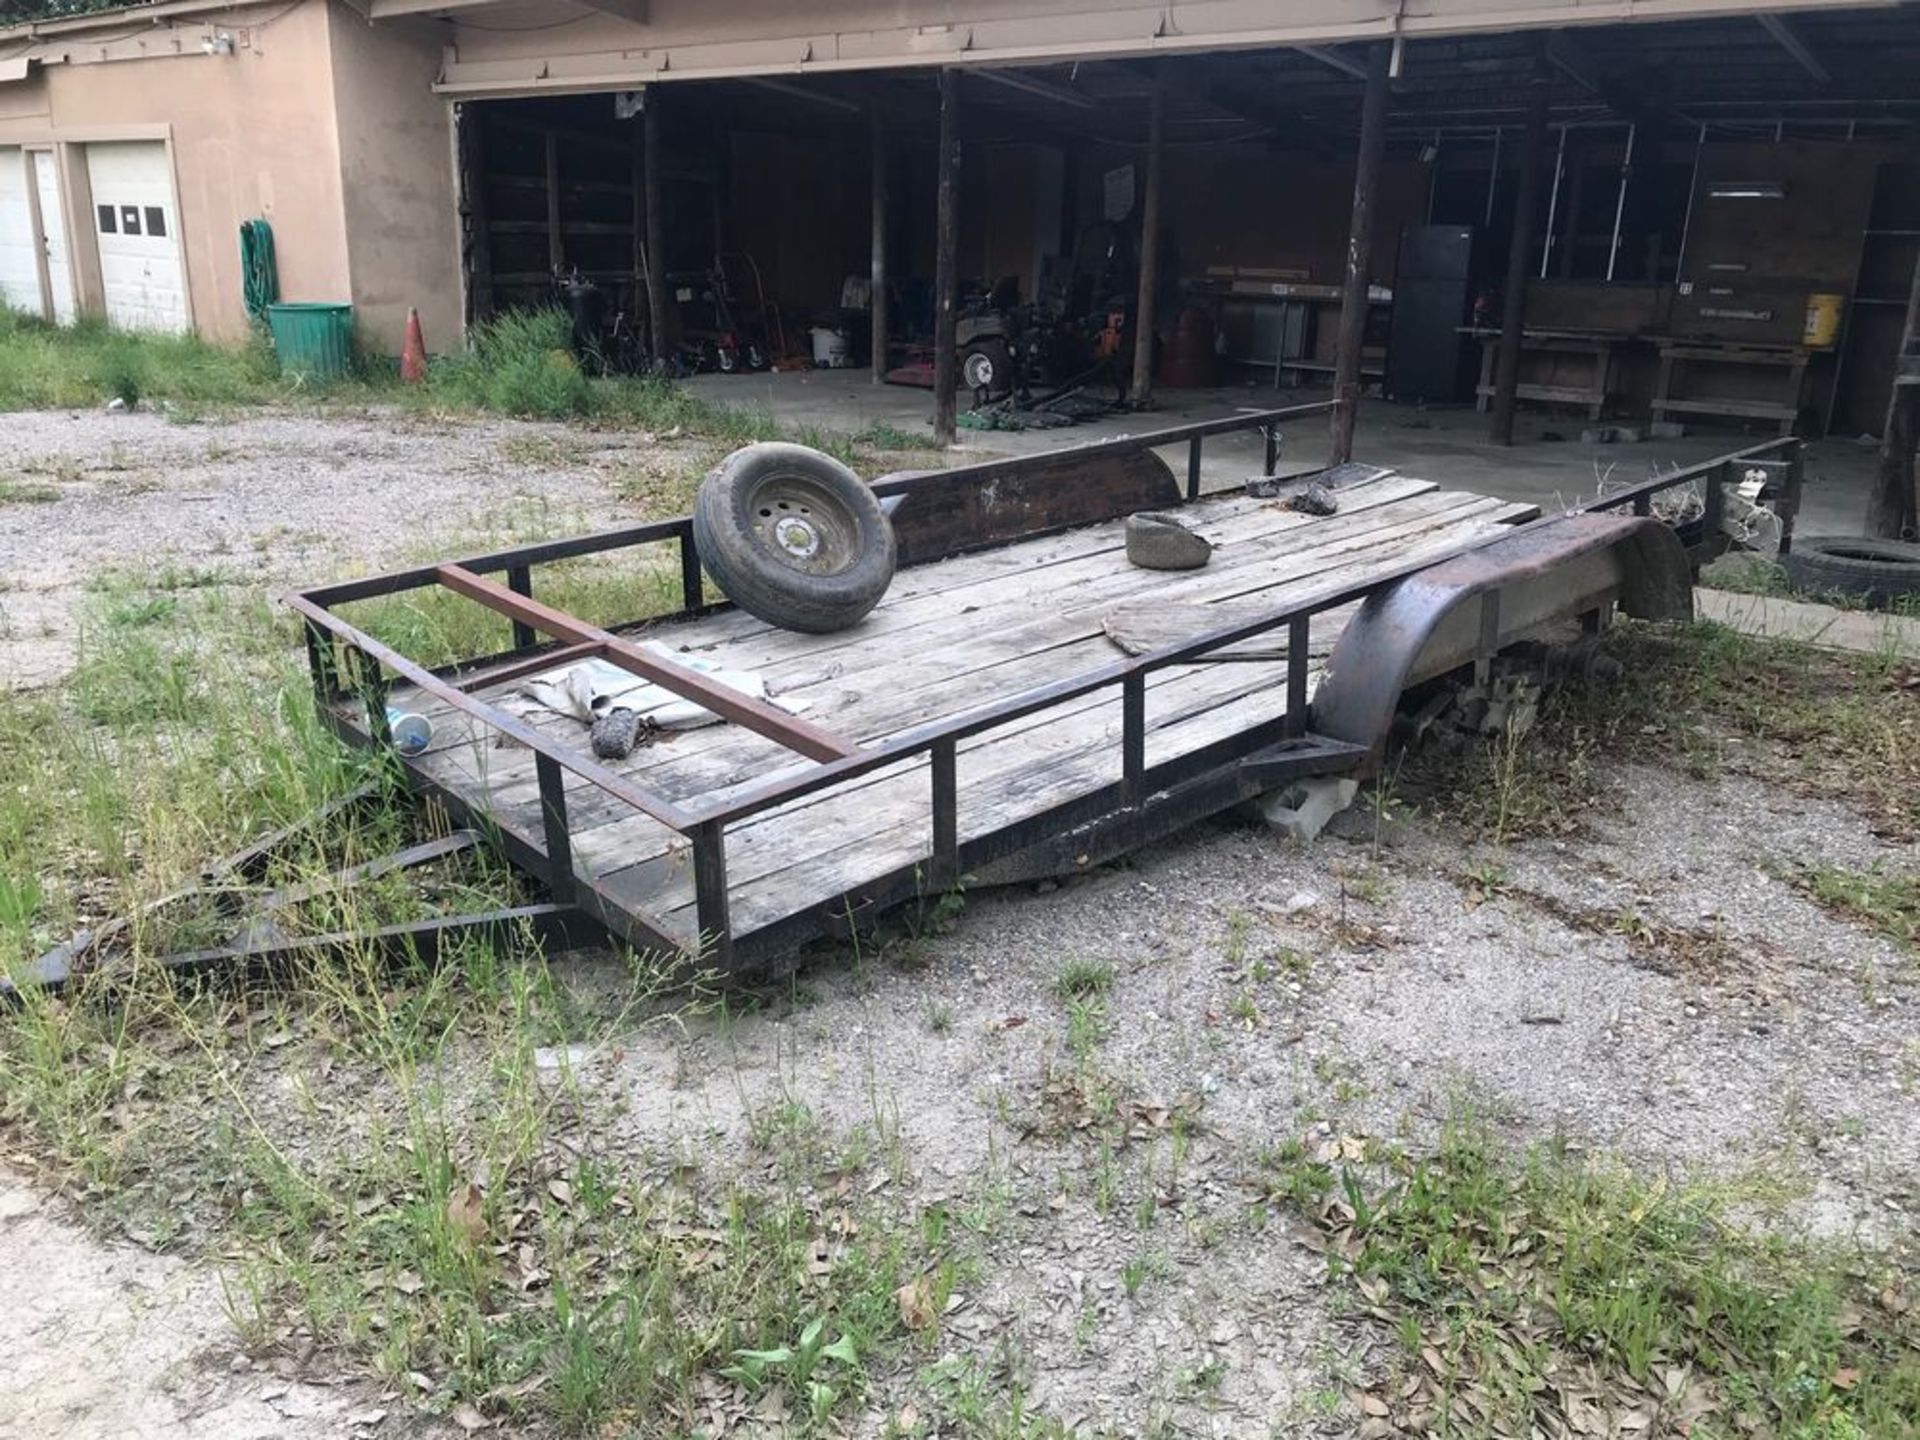 6'6"W x 16'L T/A Utility Trailer, Bumper Pull Hitch (NOTE: Missing All Tires & Wheels) - Image 2 of 4